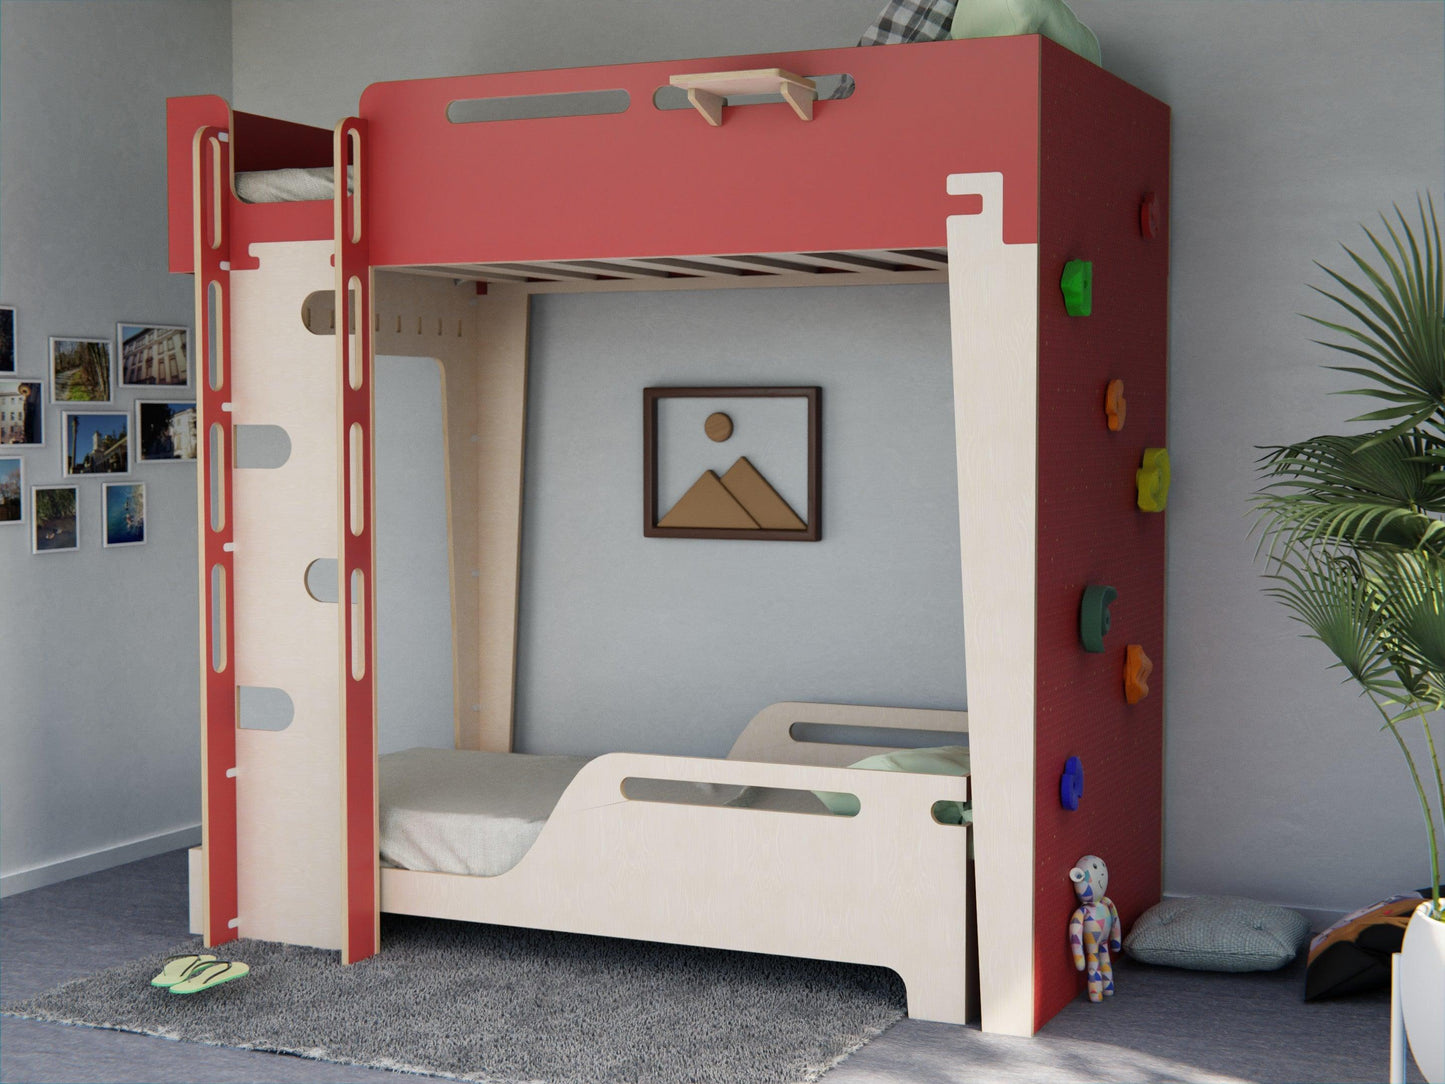 Plywood loft bed meets excitement with an integrated rock climbing wall. Transform bedtime into playtime.